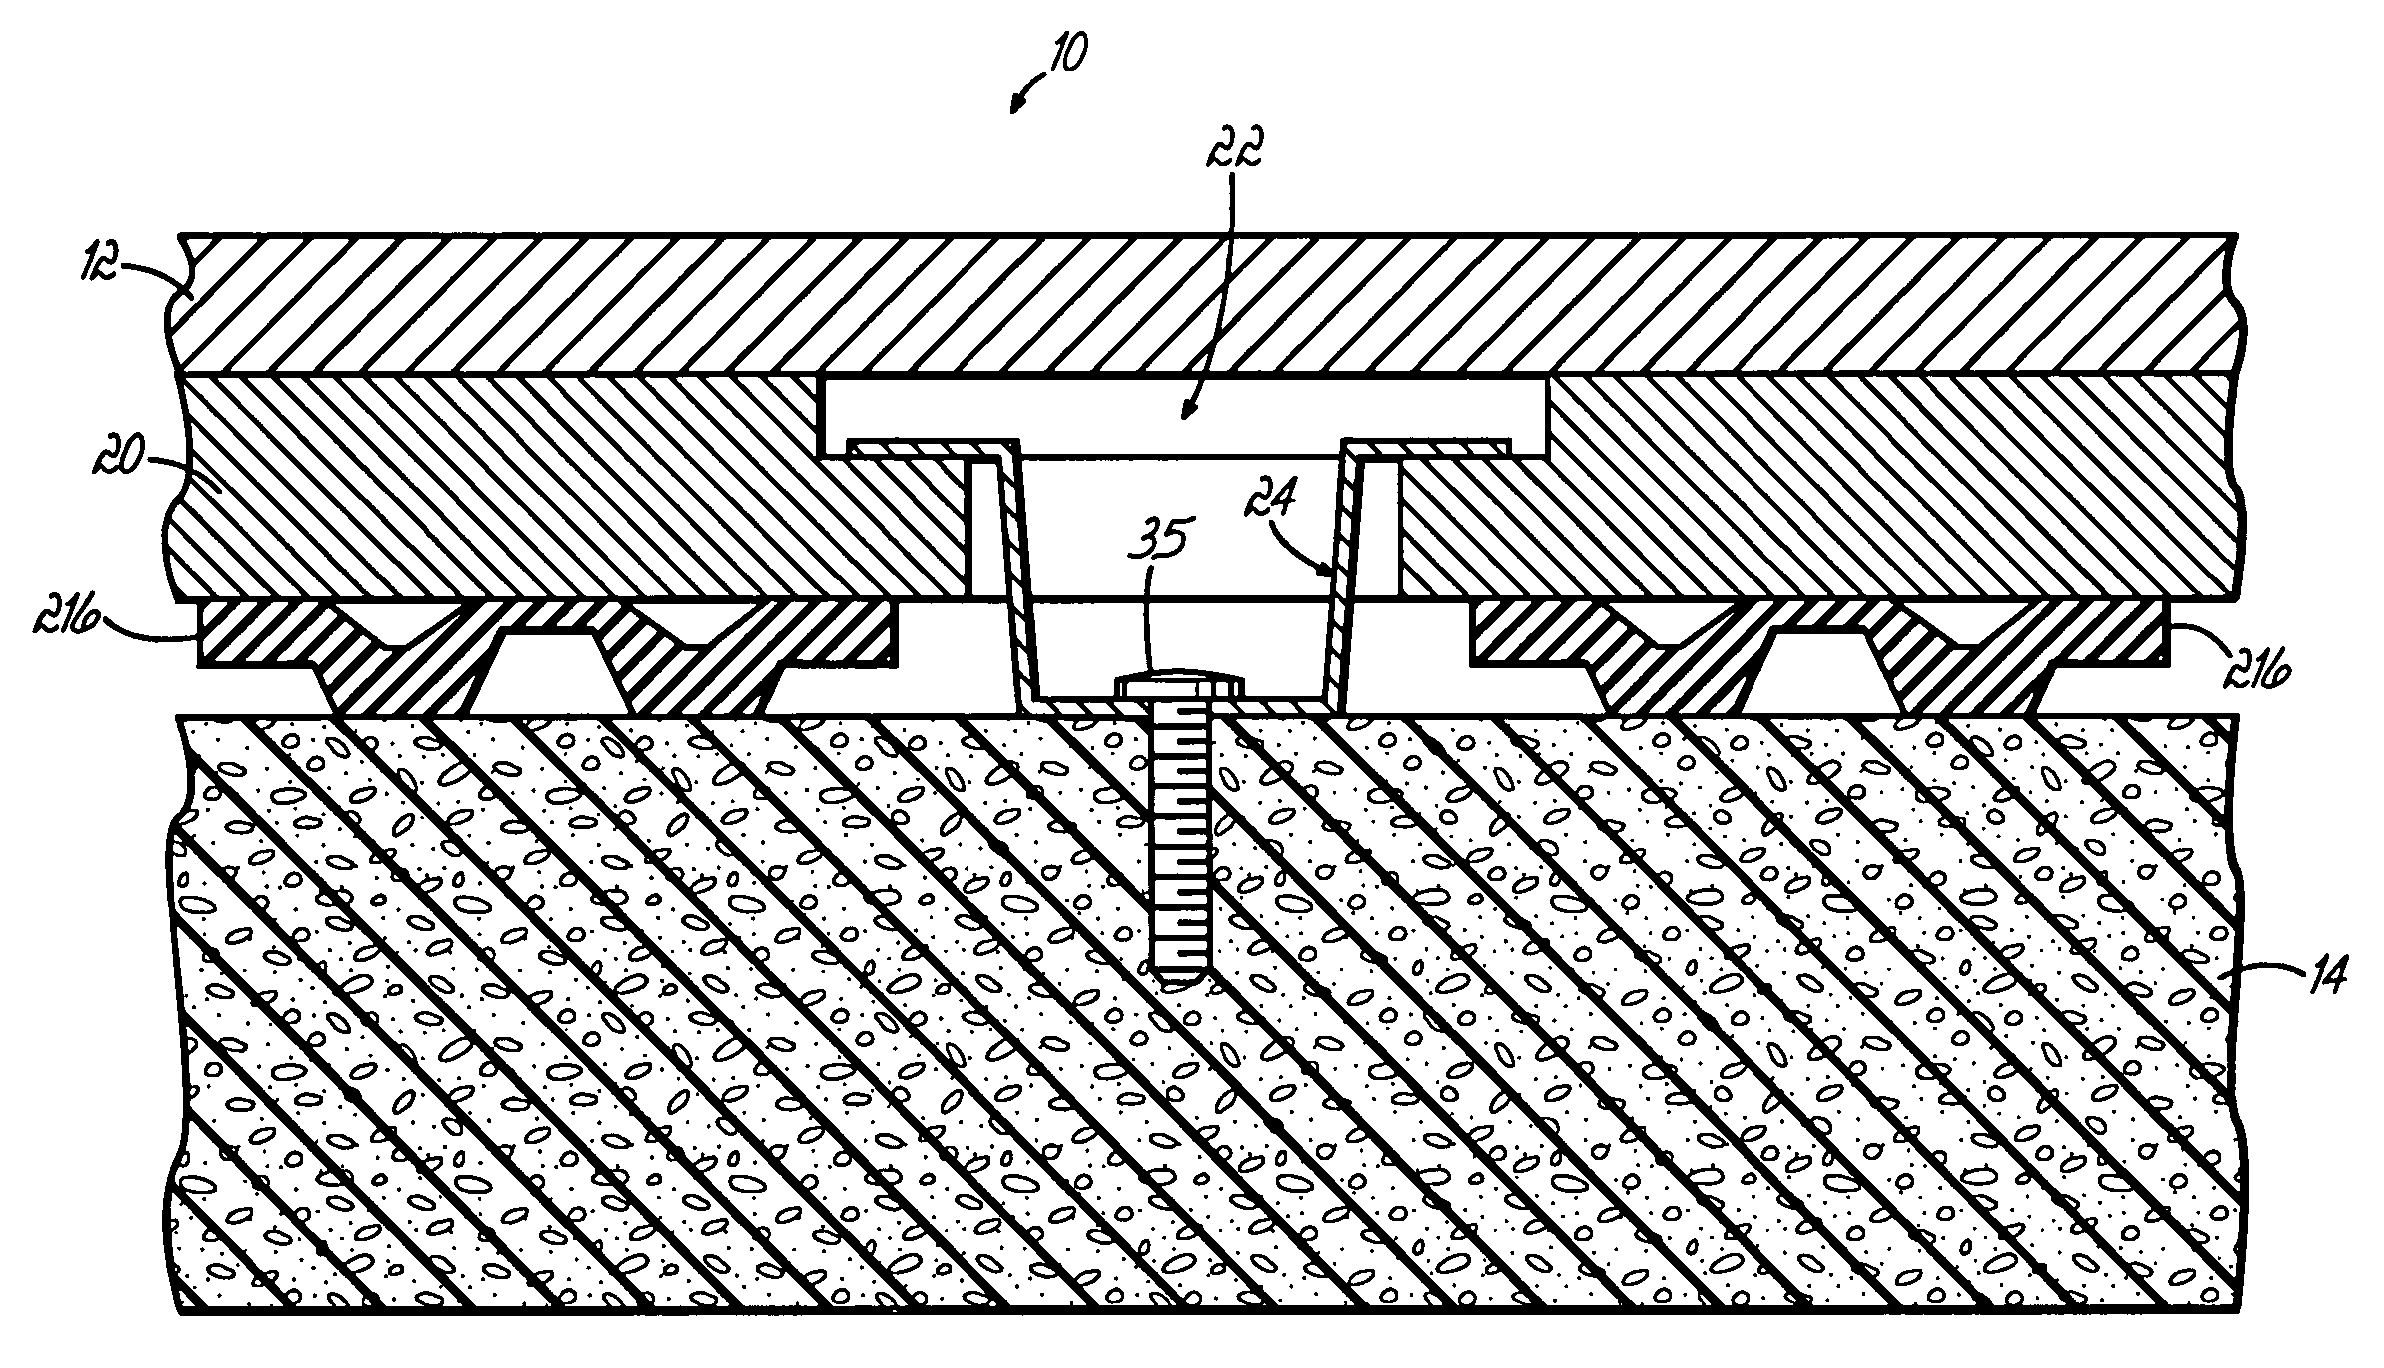 Panel-type subfloor assembly for anchored/resilient floor